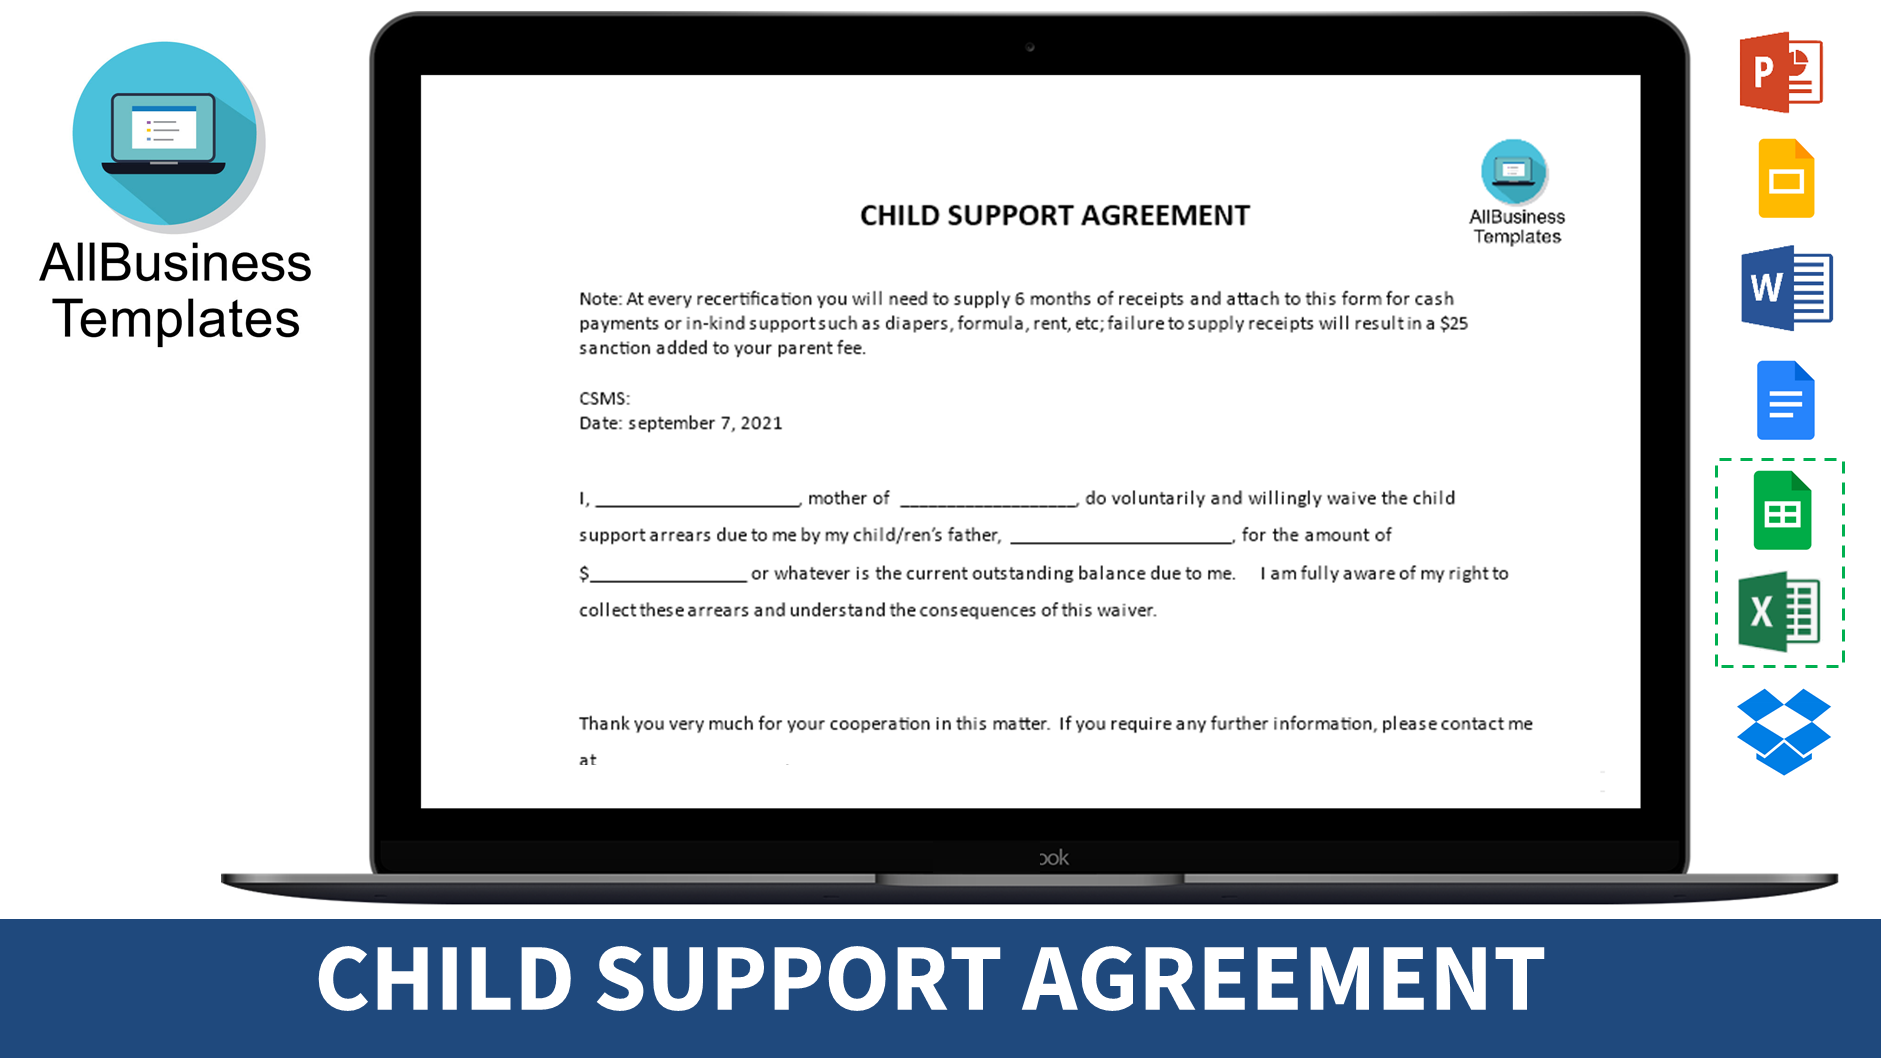 Child Support Mutual Agreement 模板